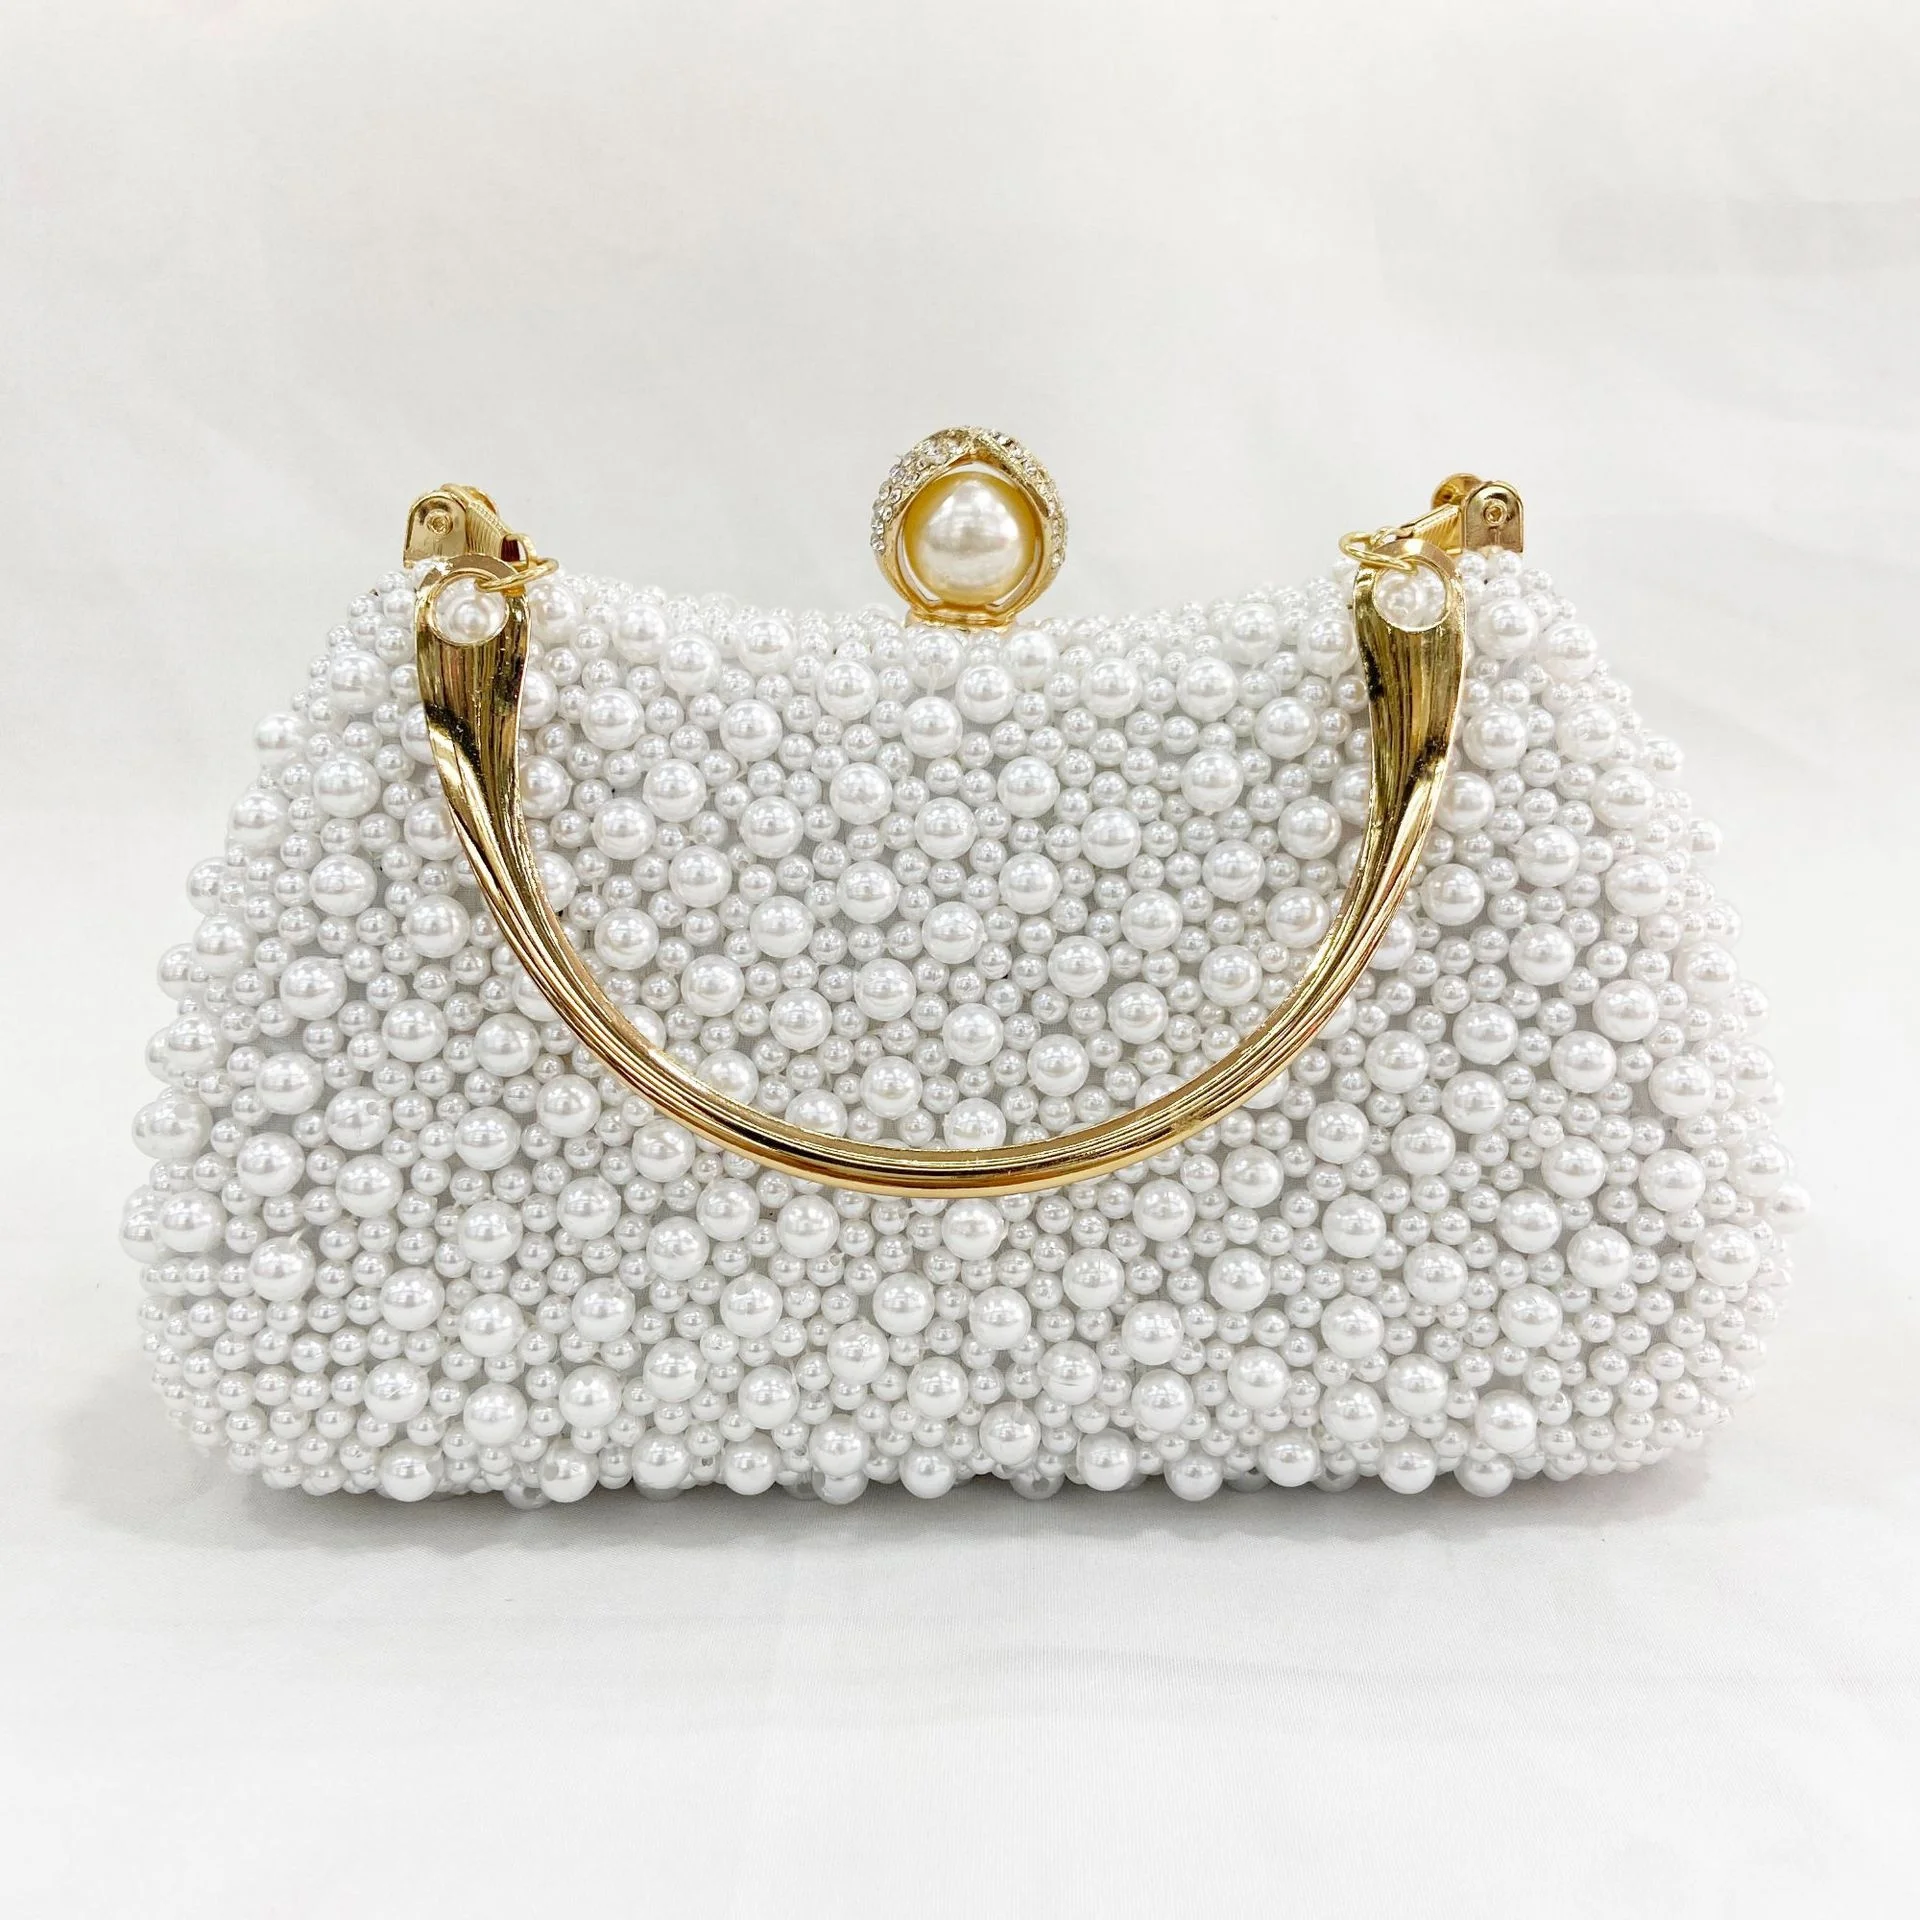 PURSEO Clutch Pearl Purses for Women Handbag Bridal Evening Clutch Bags for  Party Wedding / Dulhan Purse / Ladies Purse Gorgeous Vintage Beaded